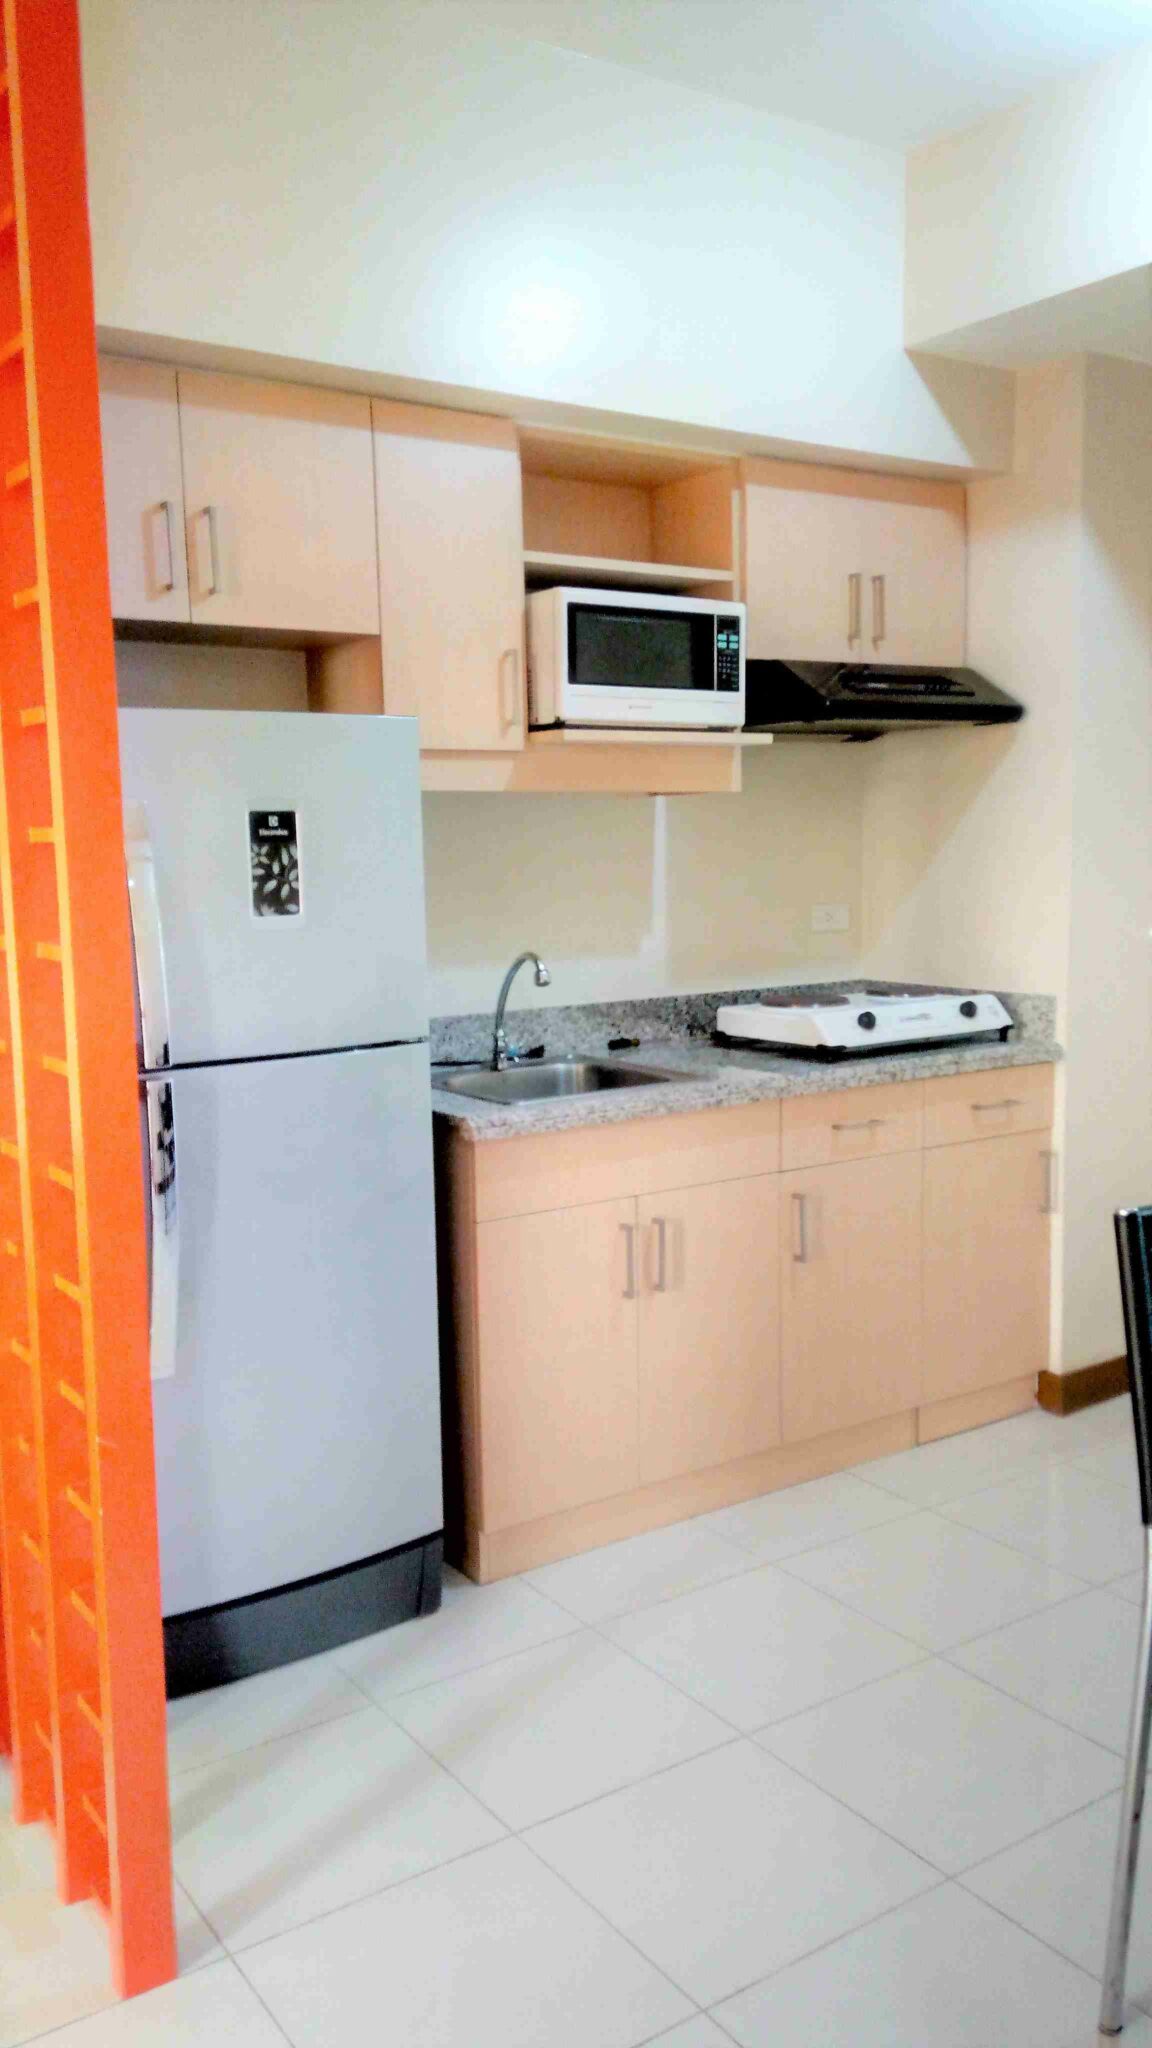 Condo Unit For Rent 18th Floor at One Castilla Place